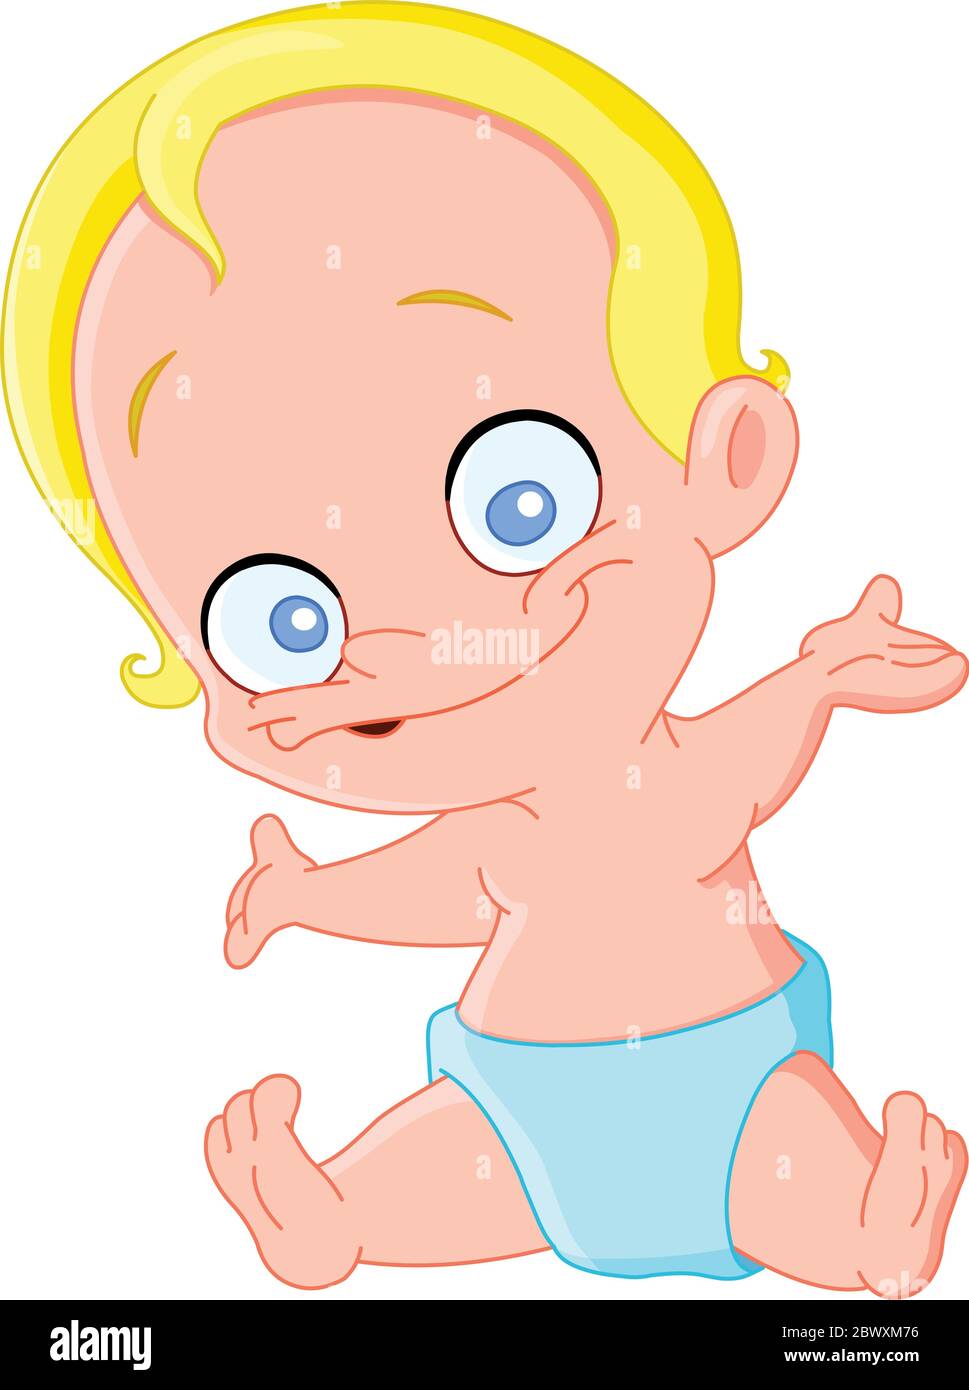 Cute Baby boy with blond hair raising his hands Stock Vector